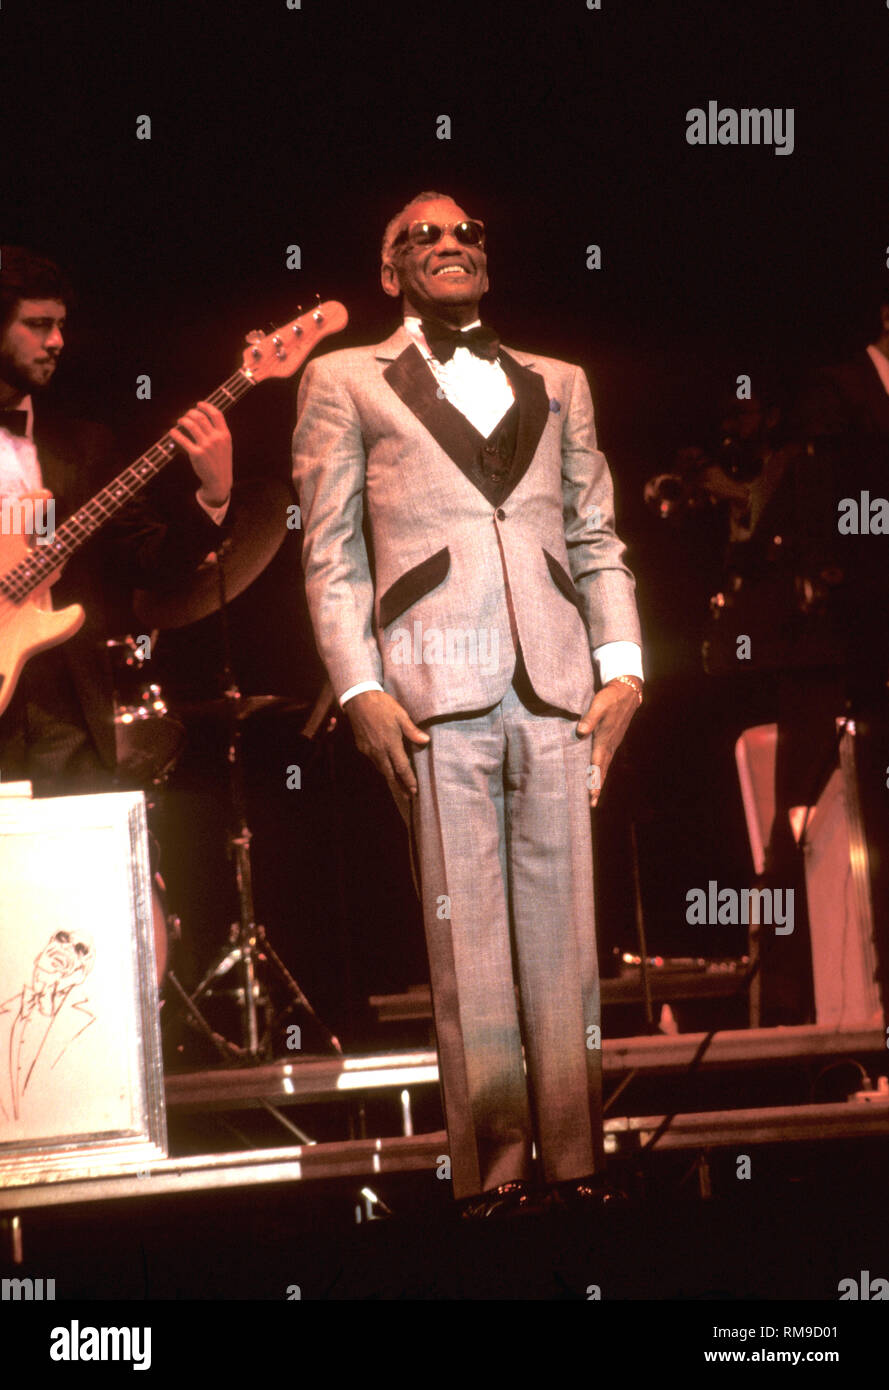 Charles is shown performing in stage during a "live" concert appearance Stock Photo - Alamy